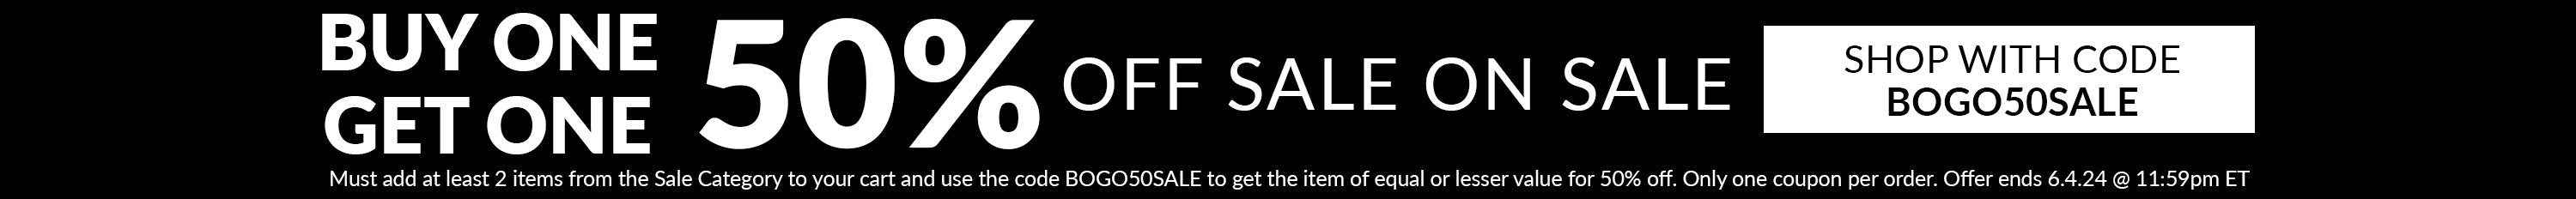 buy 1 get 1 50% off sale on sale use code BOGO50SALE *Must add at least 2 items from the Sale Category to your cart and use the code BOGO50SALE to get the item of equal or lesser value for 50% off. Only one coupon per order. Offer ends 6.4.24 @ 11:59pm ET